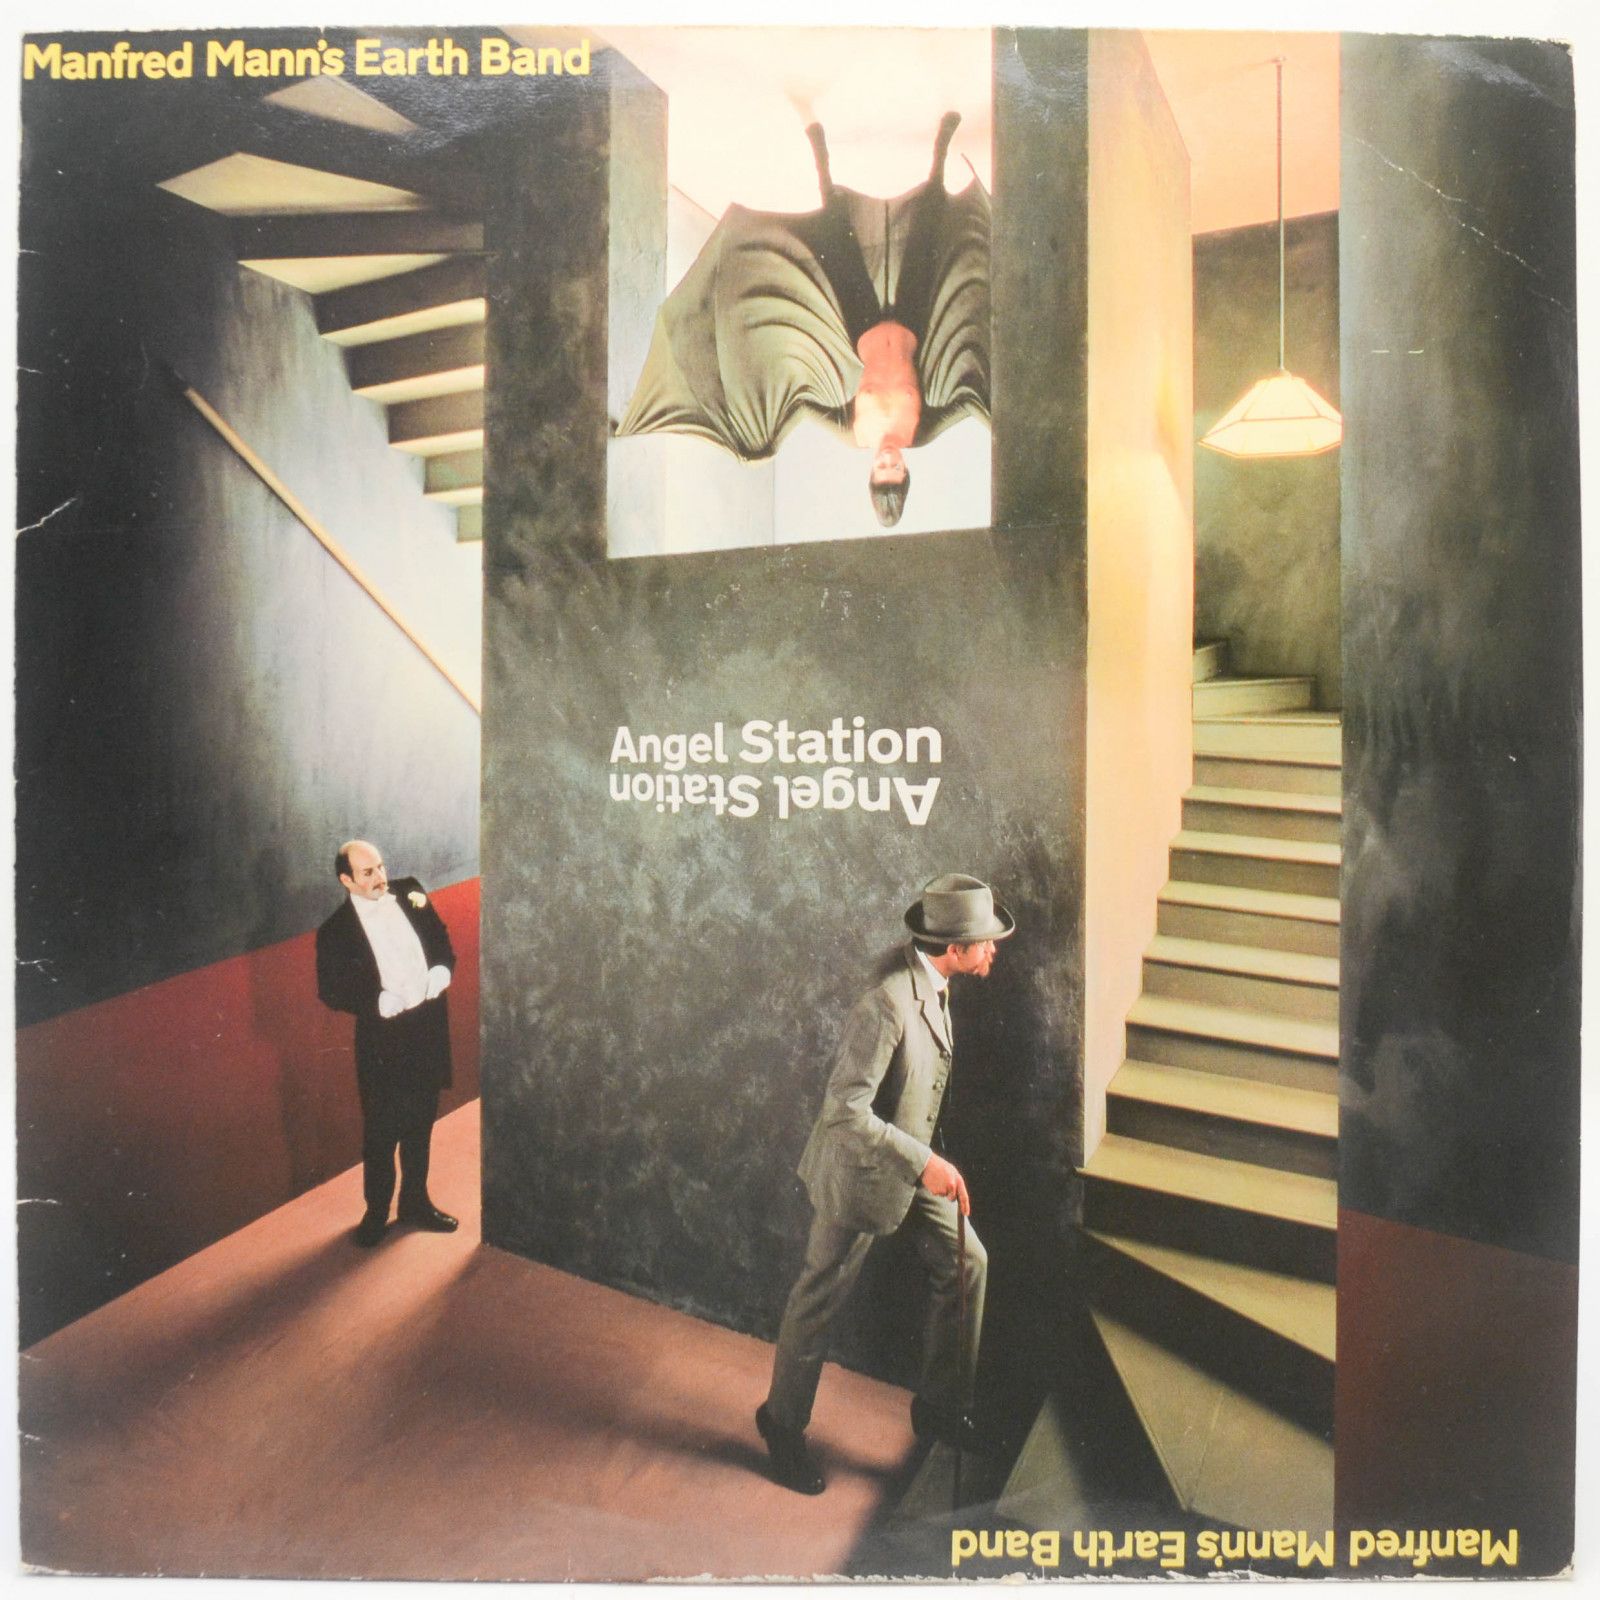 Manfred Mann's Earth Band — Angel Station (poster ), 1979